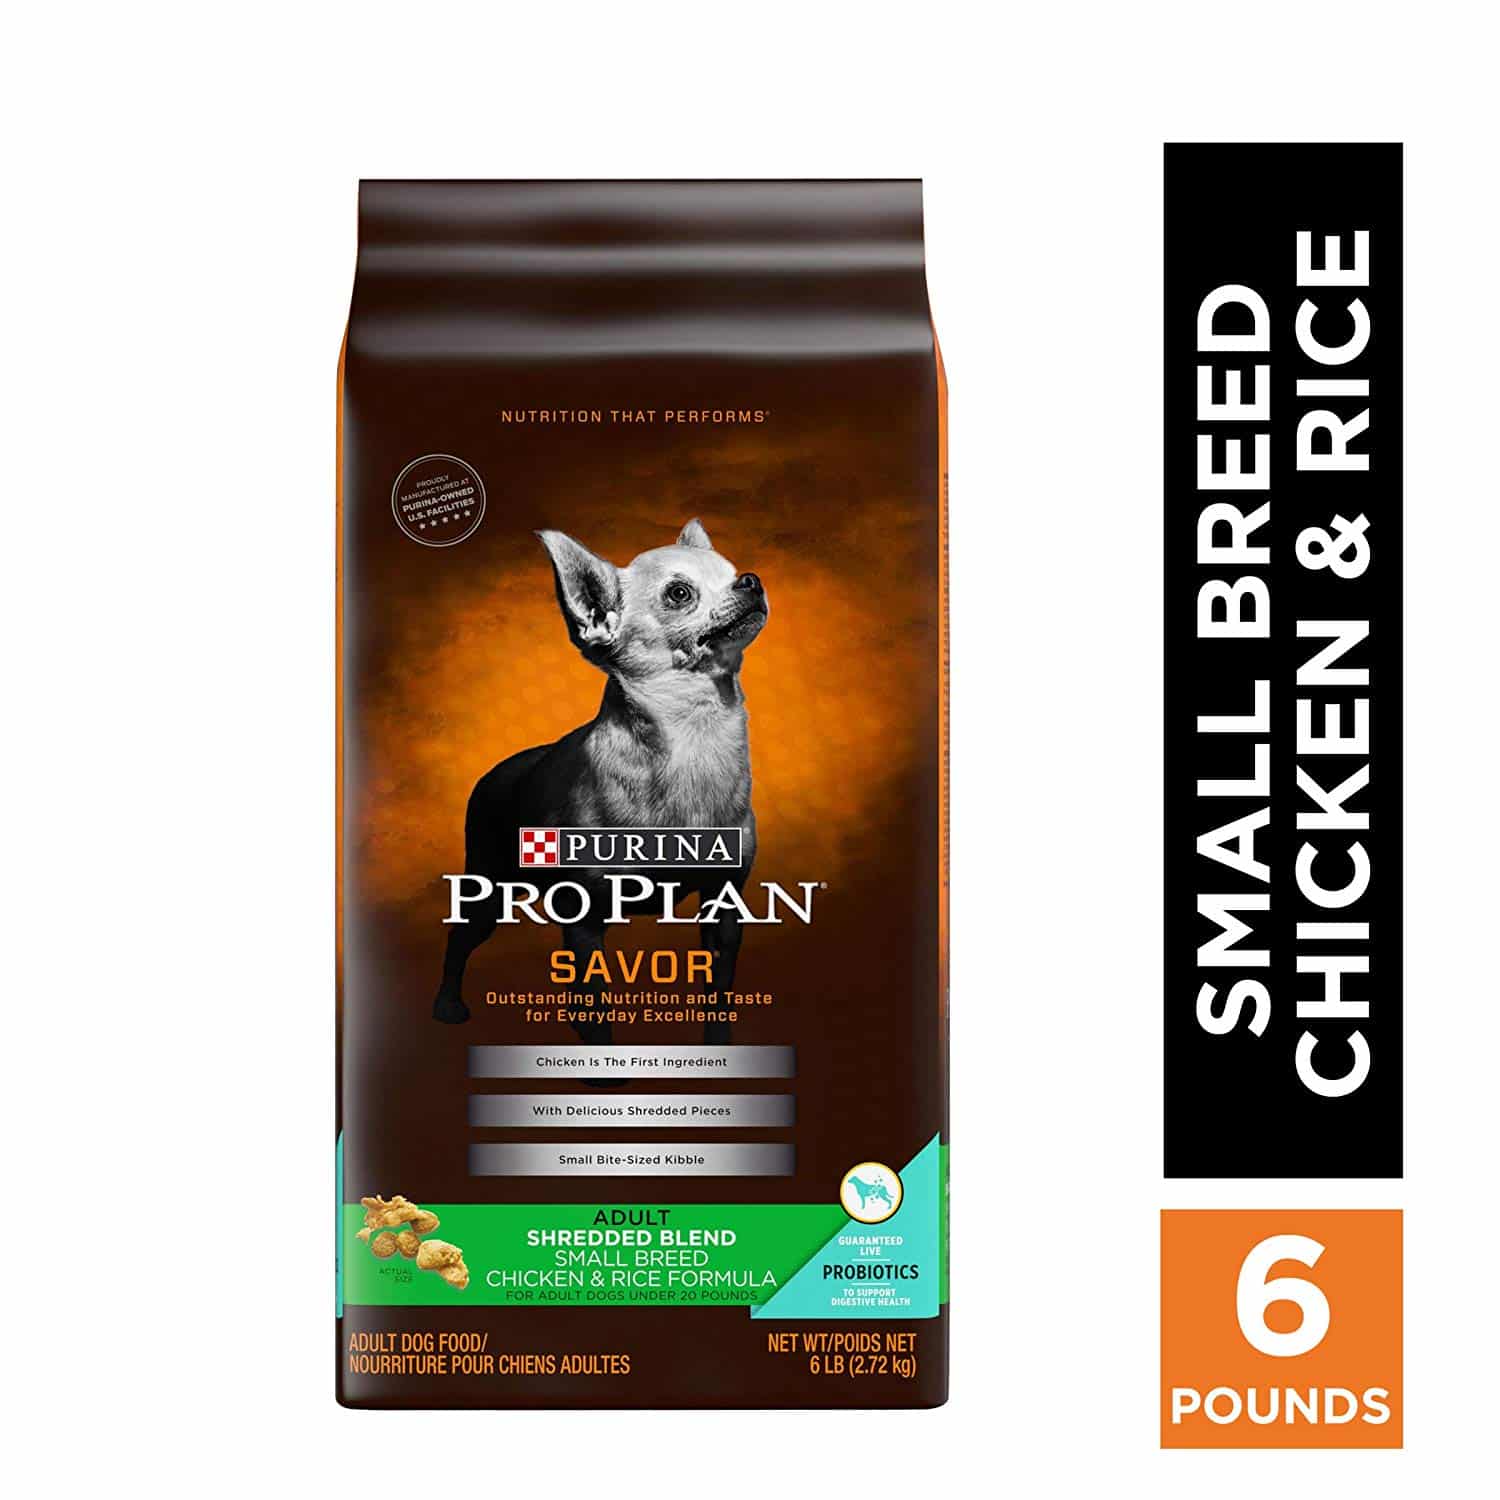 7 Best Dog Food For Skin Allergies Reviews and Buying Guide